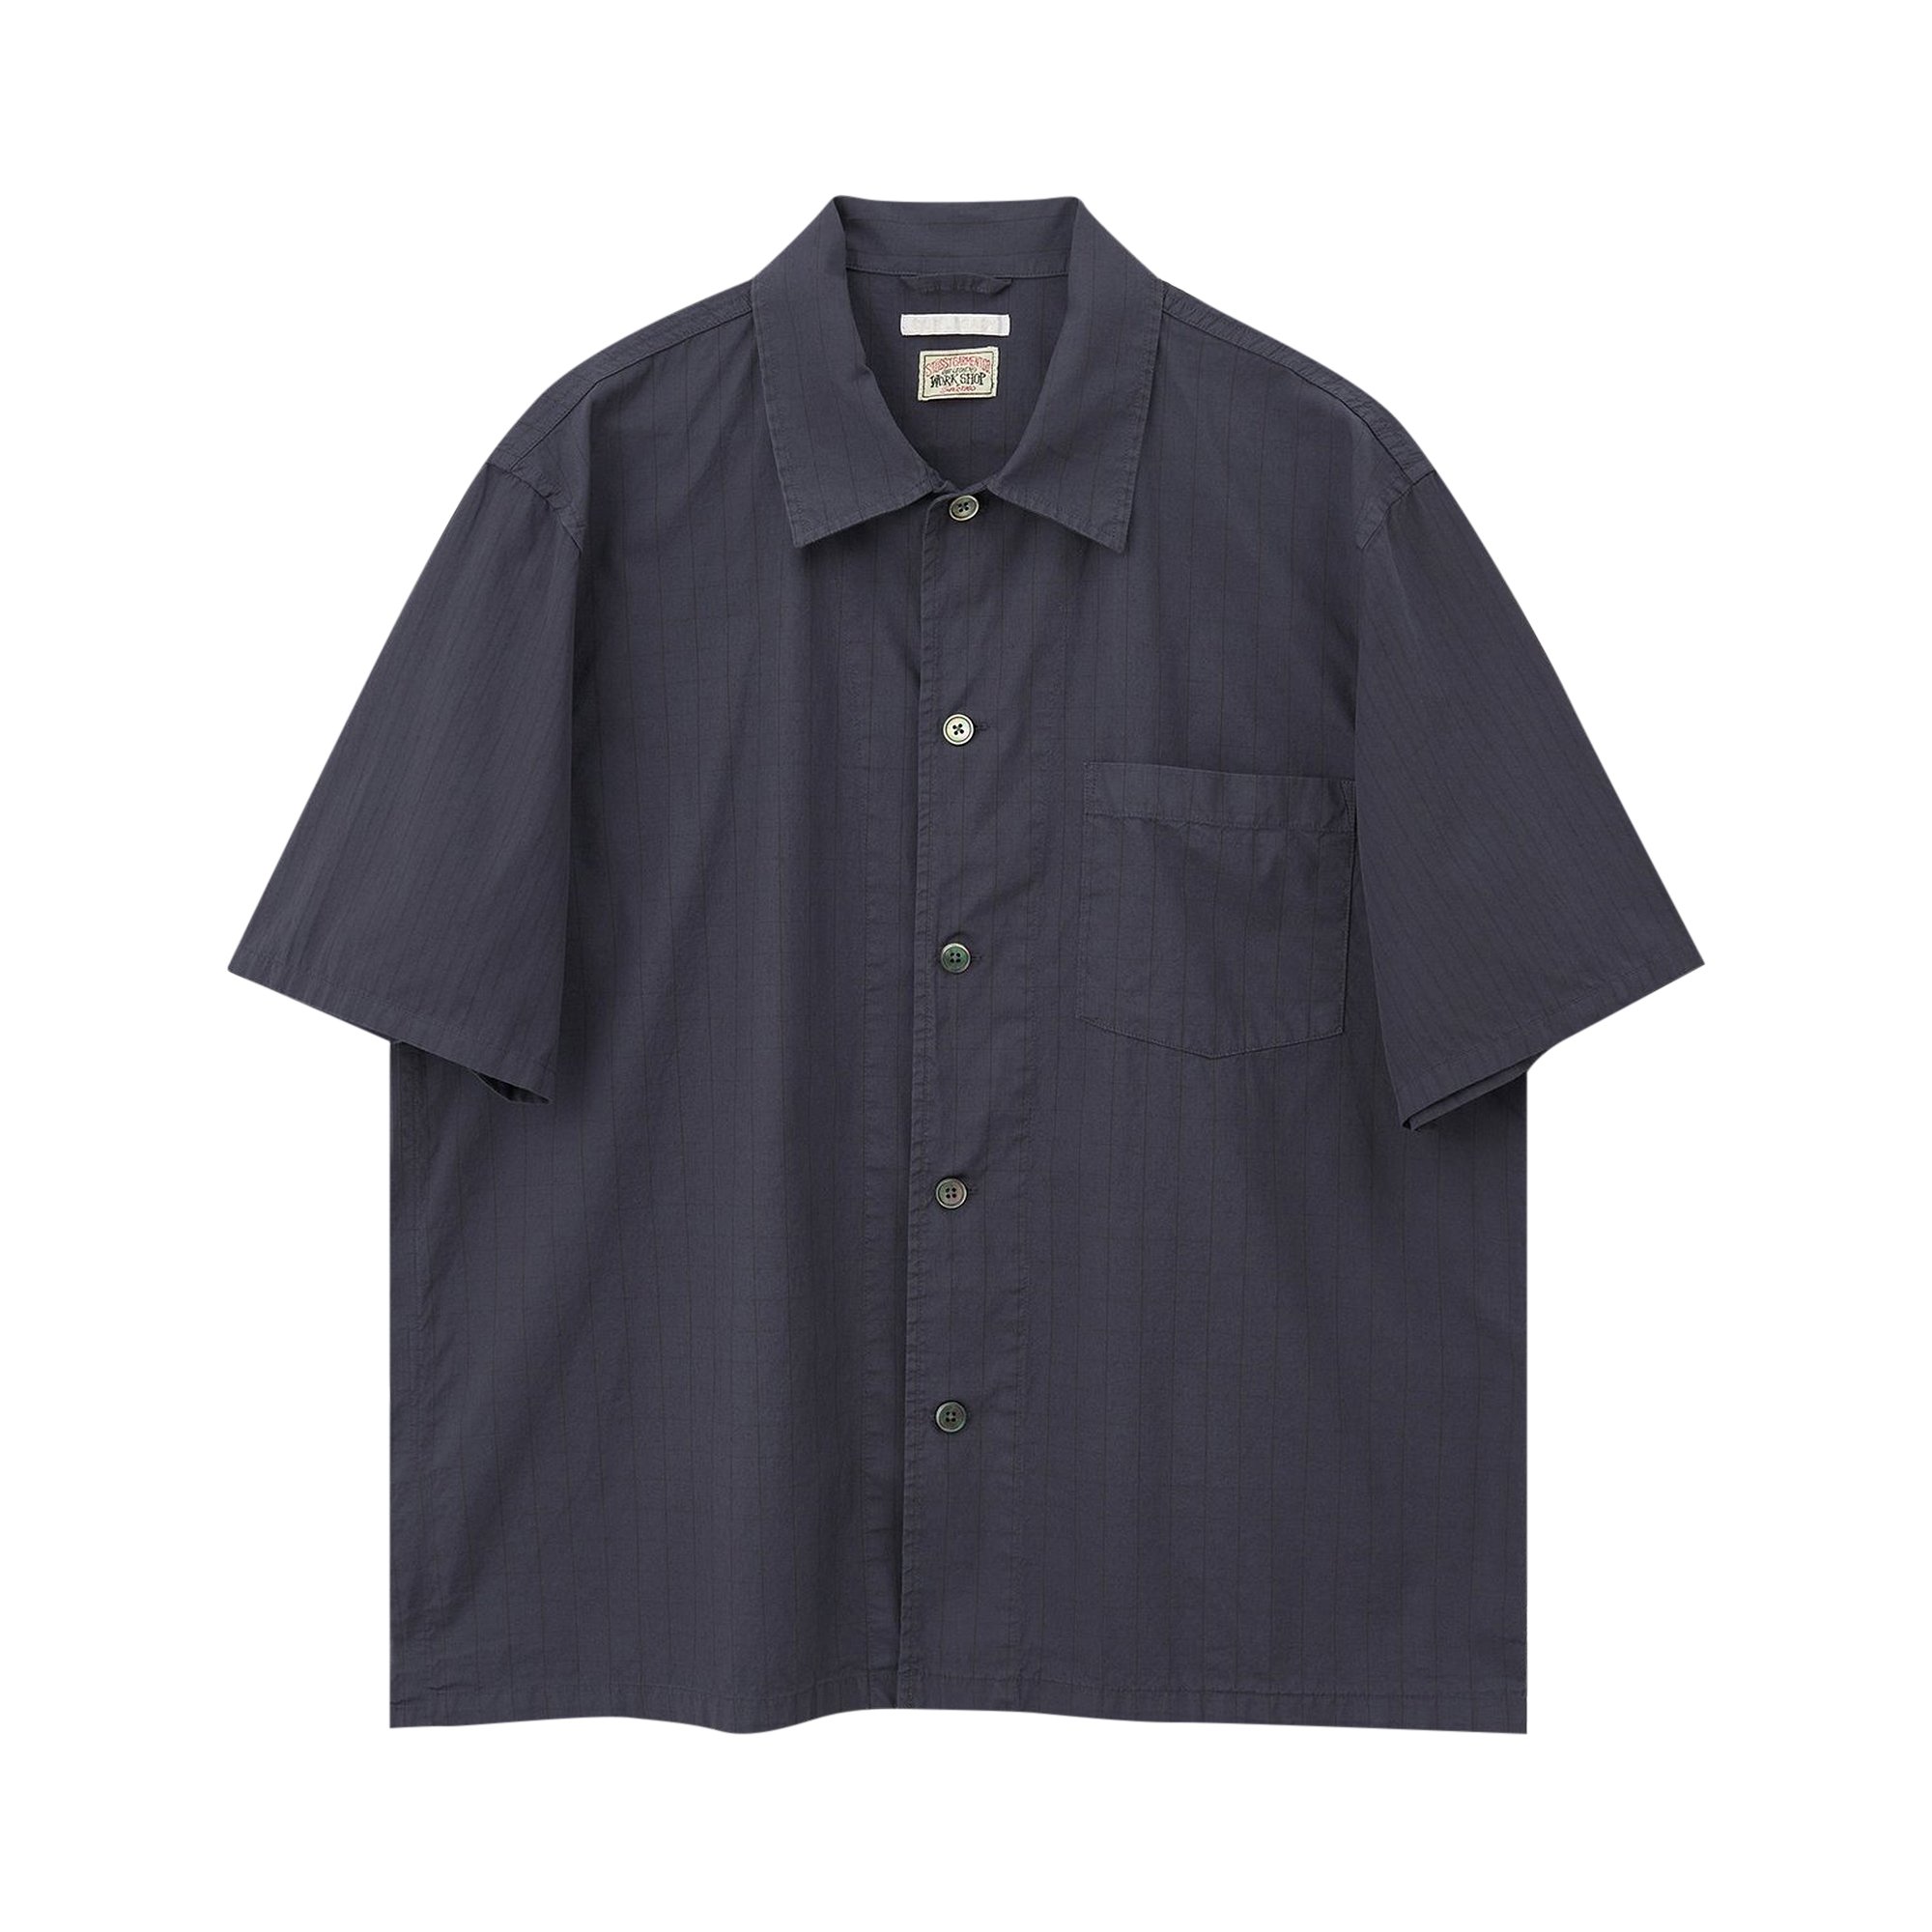 Buy Stussy x Our Legacy Box Shirt 'Overdyed' - MS202BDG OVER | GOAT